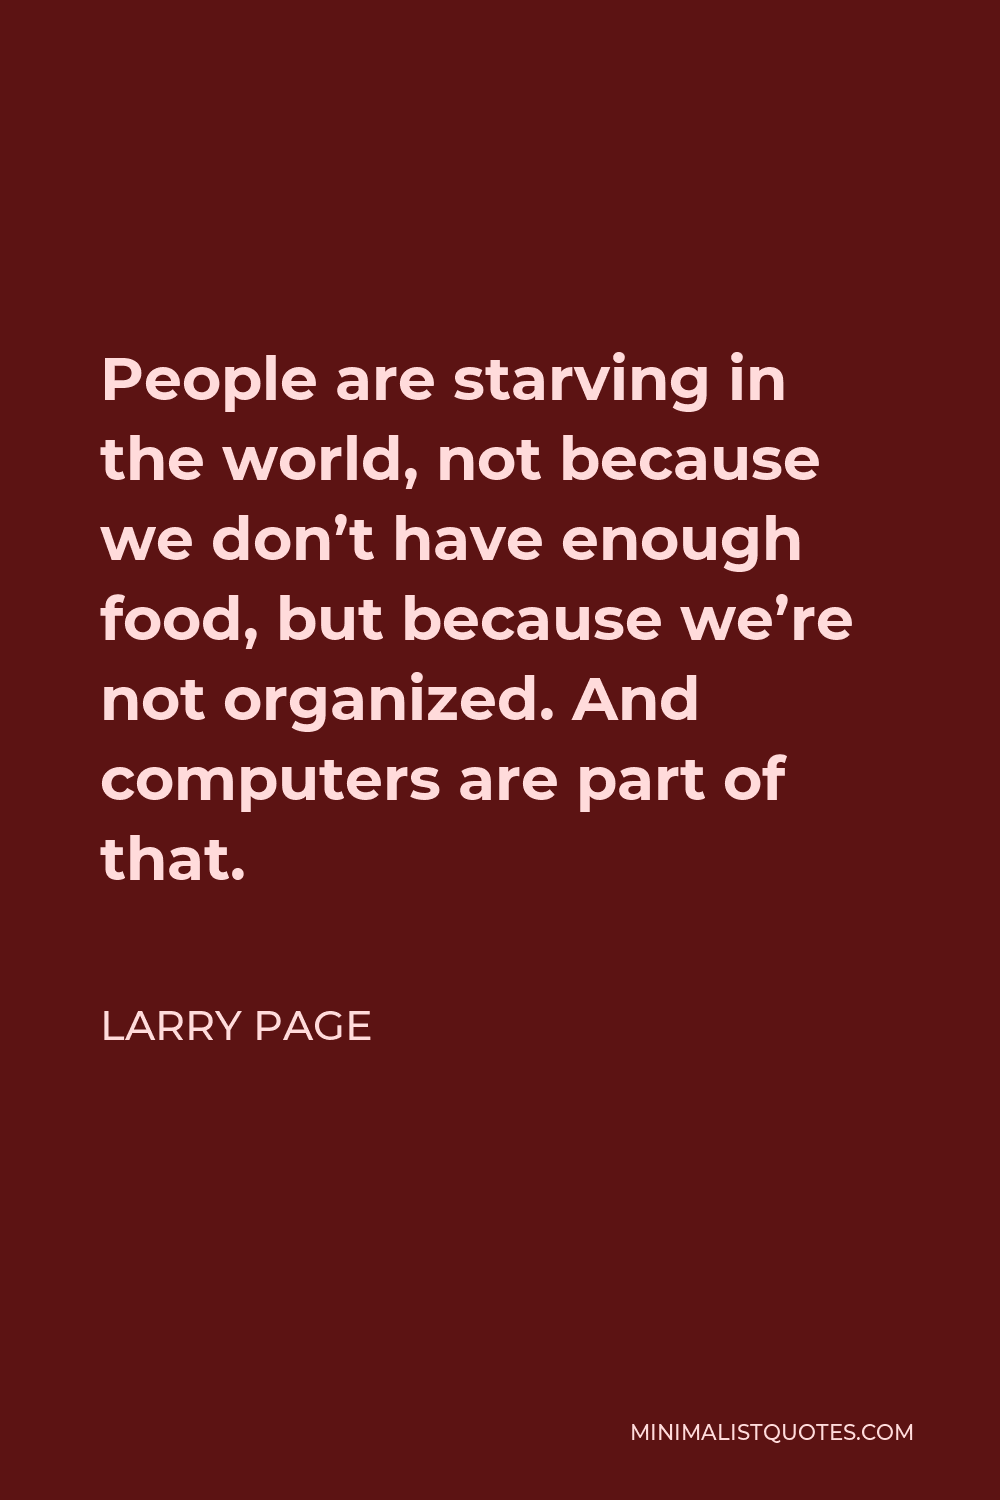 Larry Page Quote - People are starving in the world, not because we don’t have enough food, but because we’re not organized. And computers are part of that.